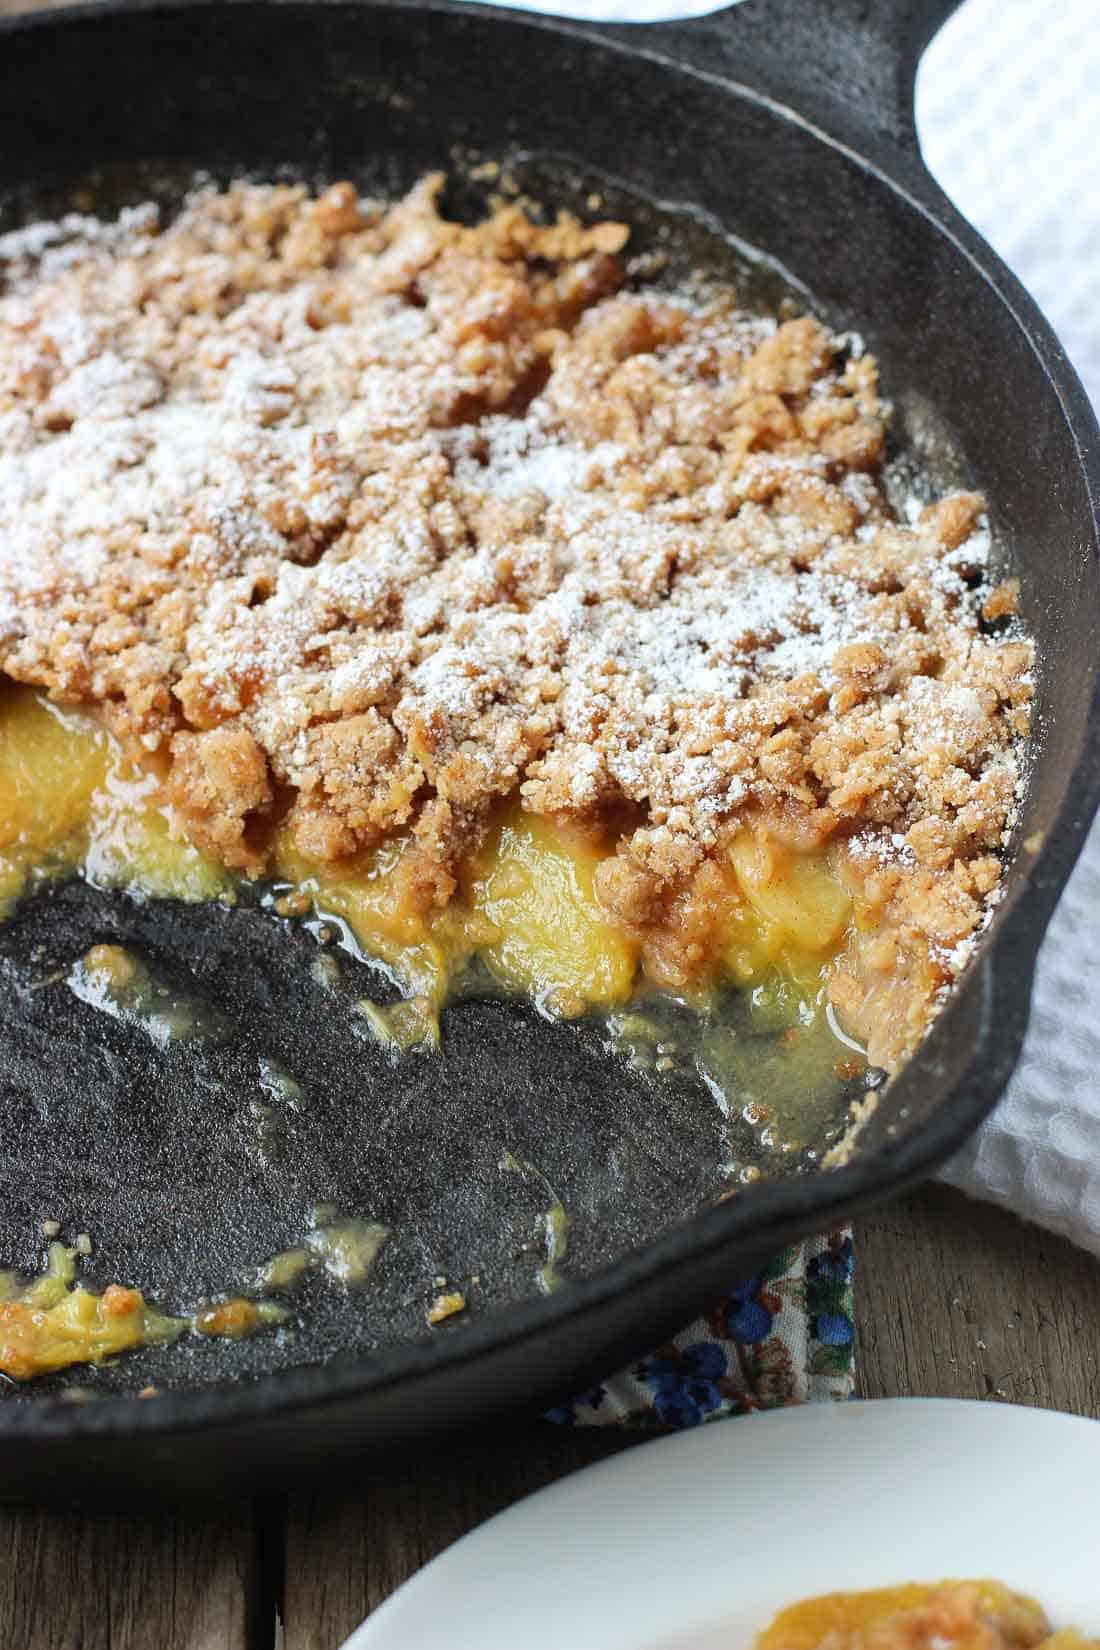 Half of a peach crisp in a cast iron skillet showing the peaches covered with a thick crumb layer dusted with powdered sugar